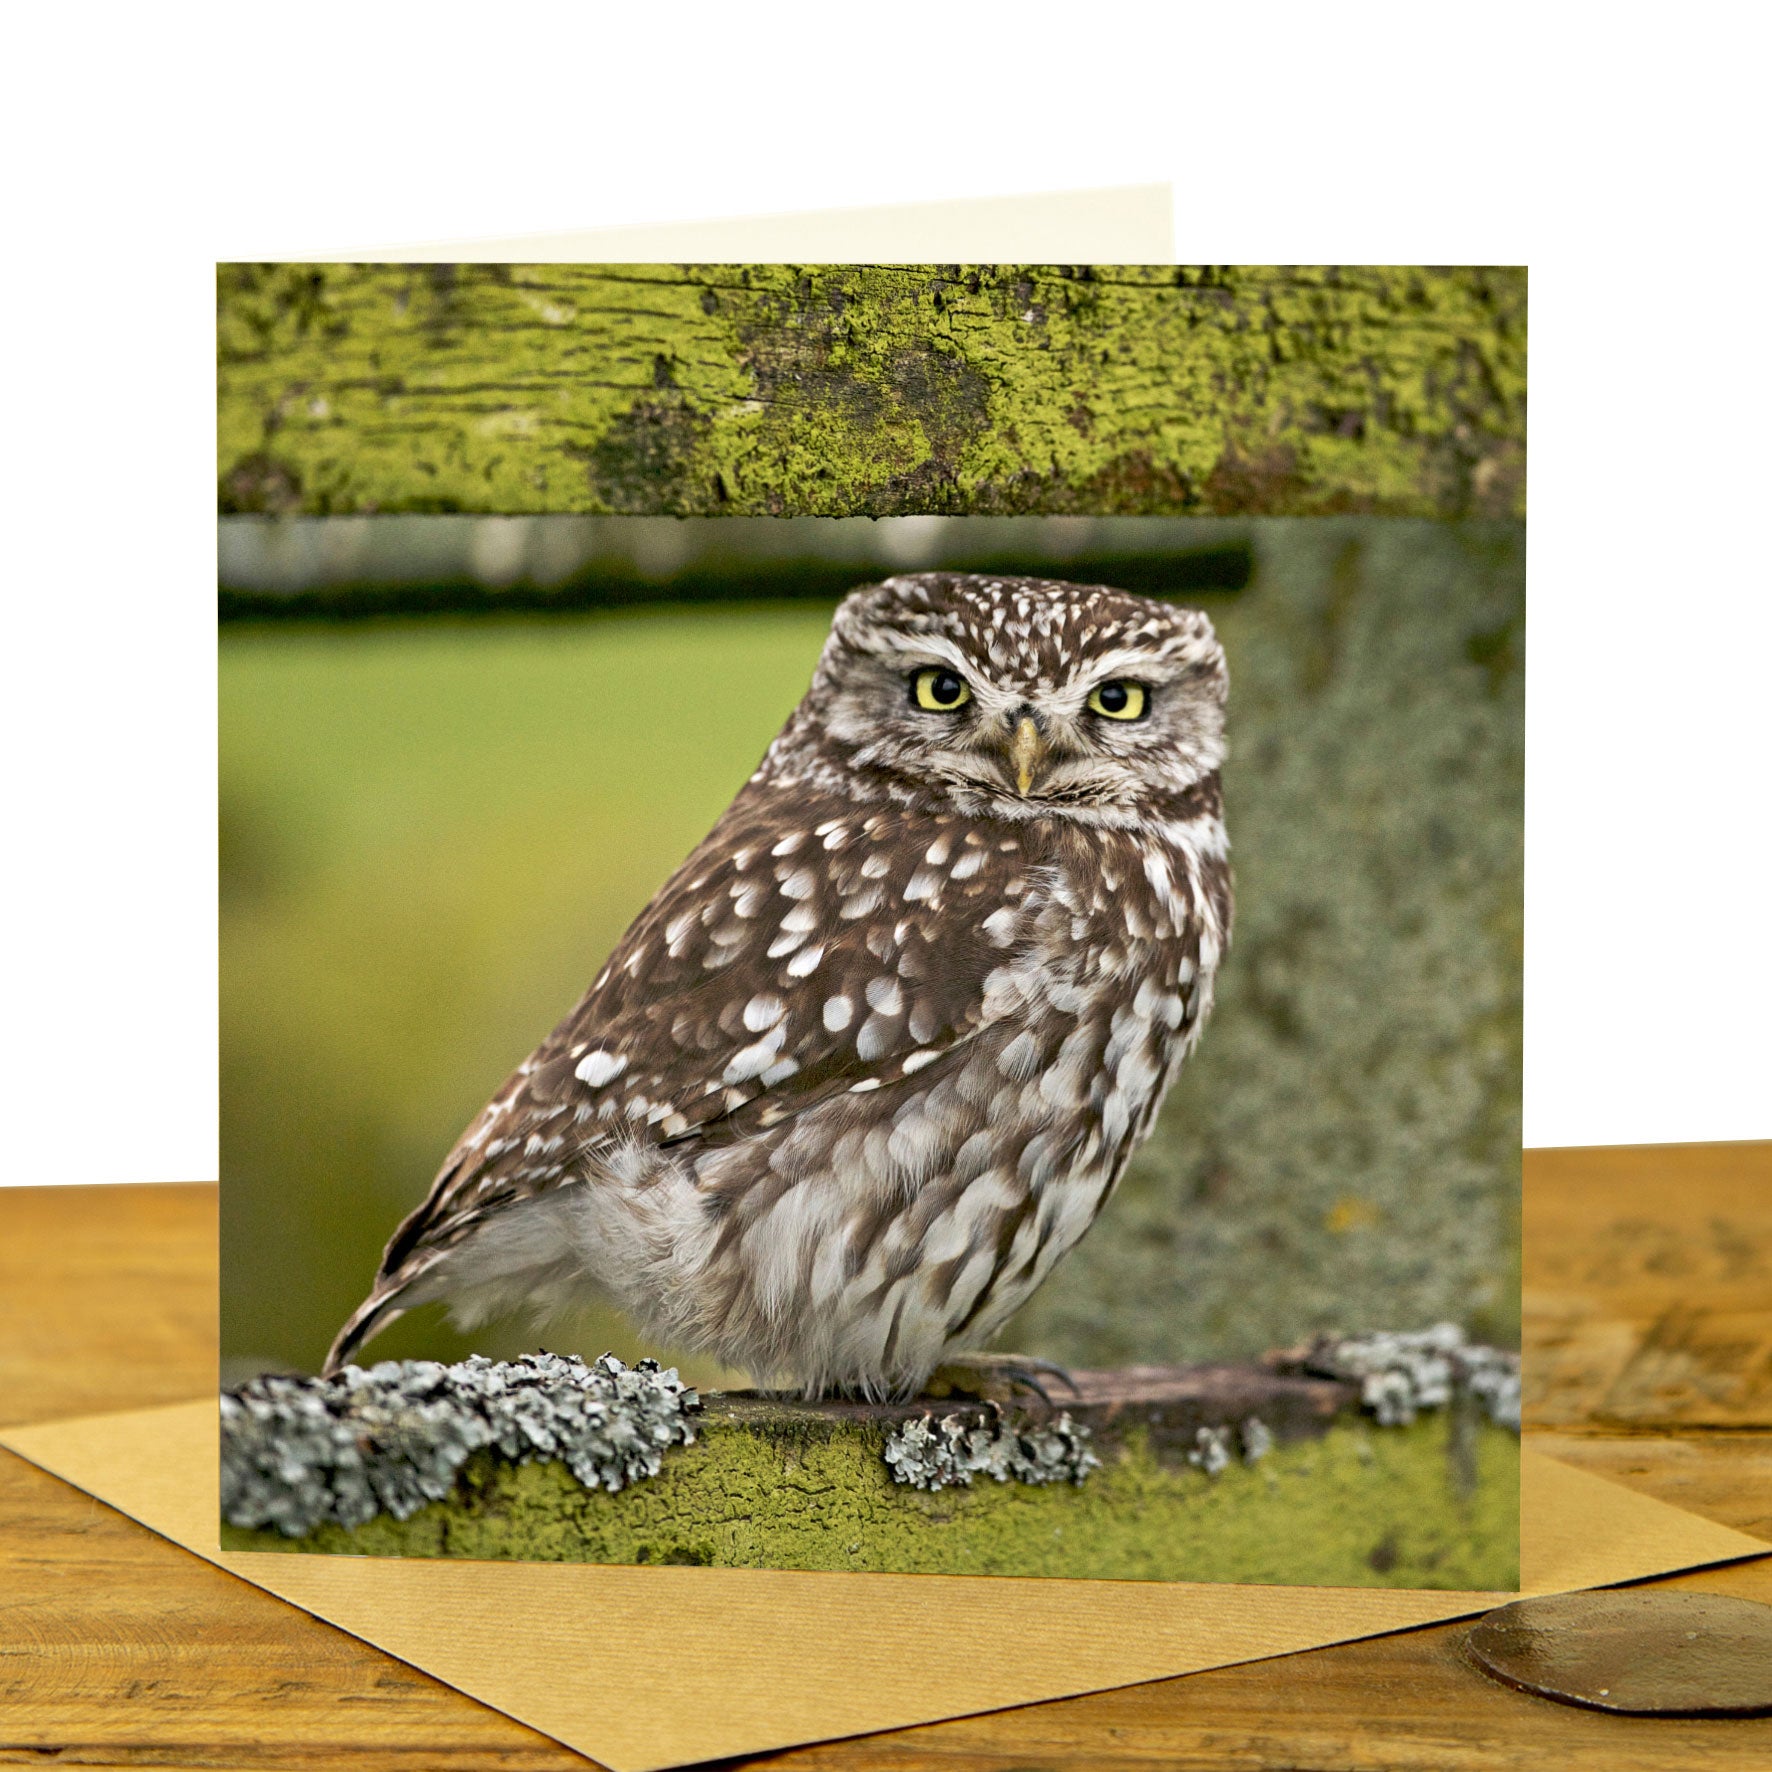 Owl Cards - Little Owl on Fence in Colour Card